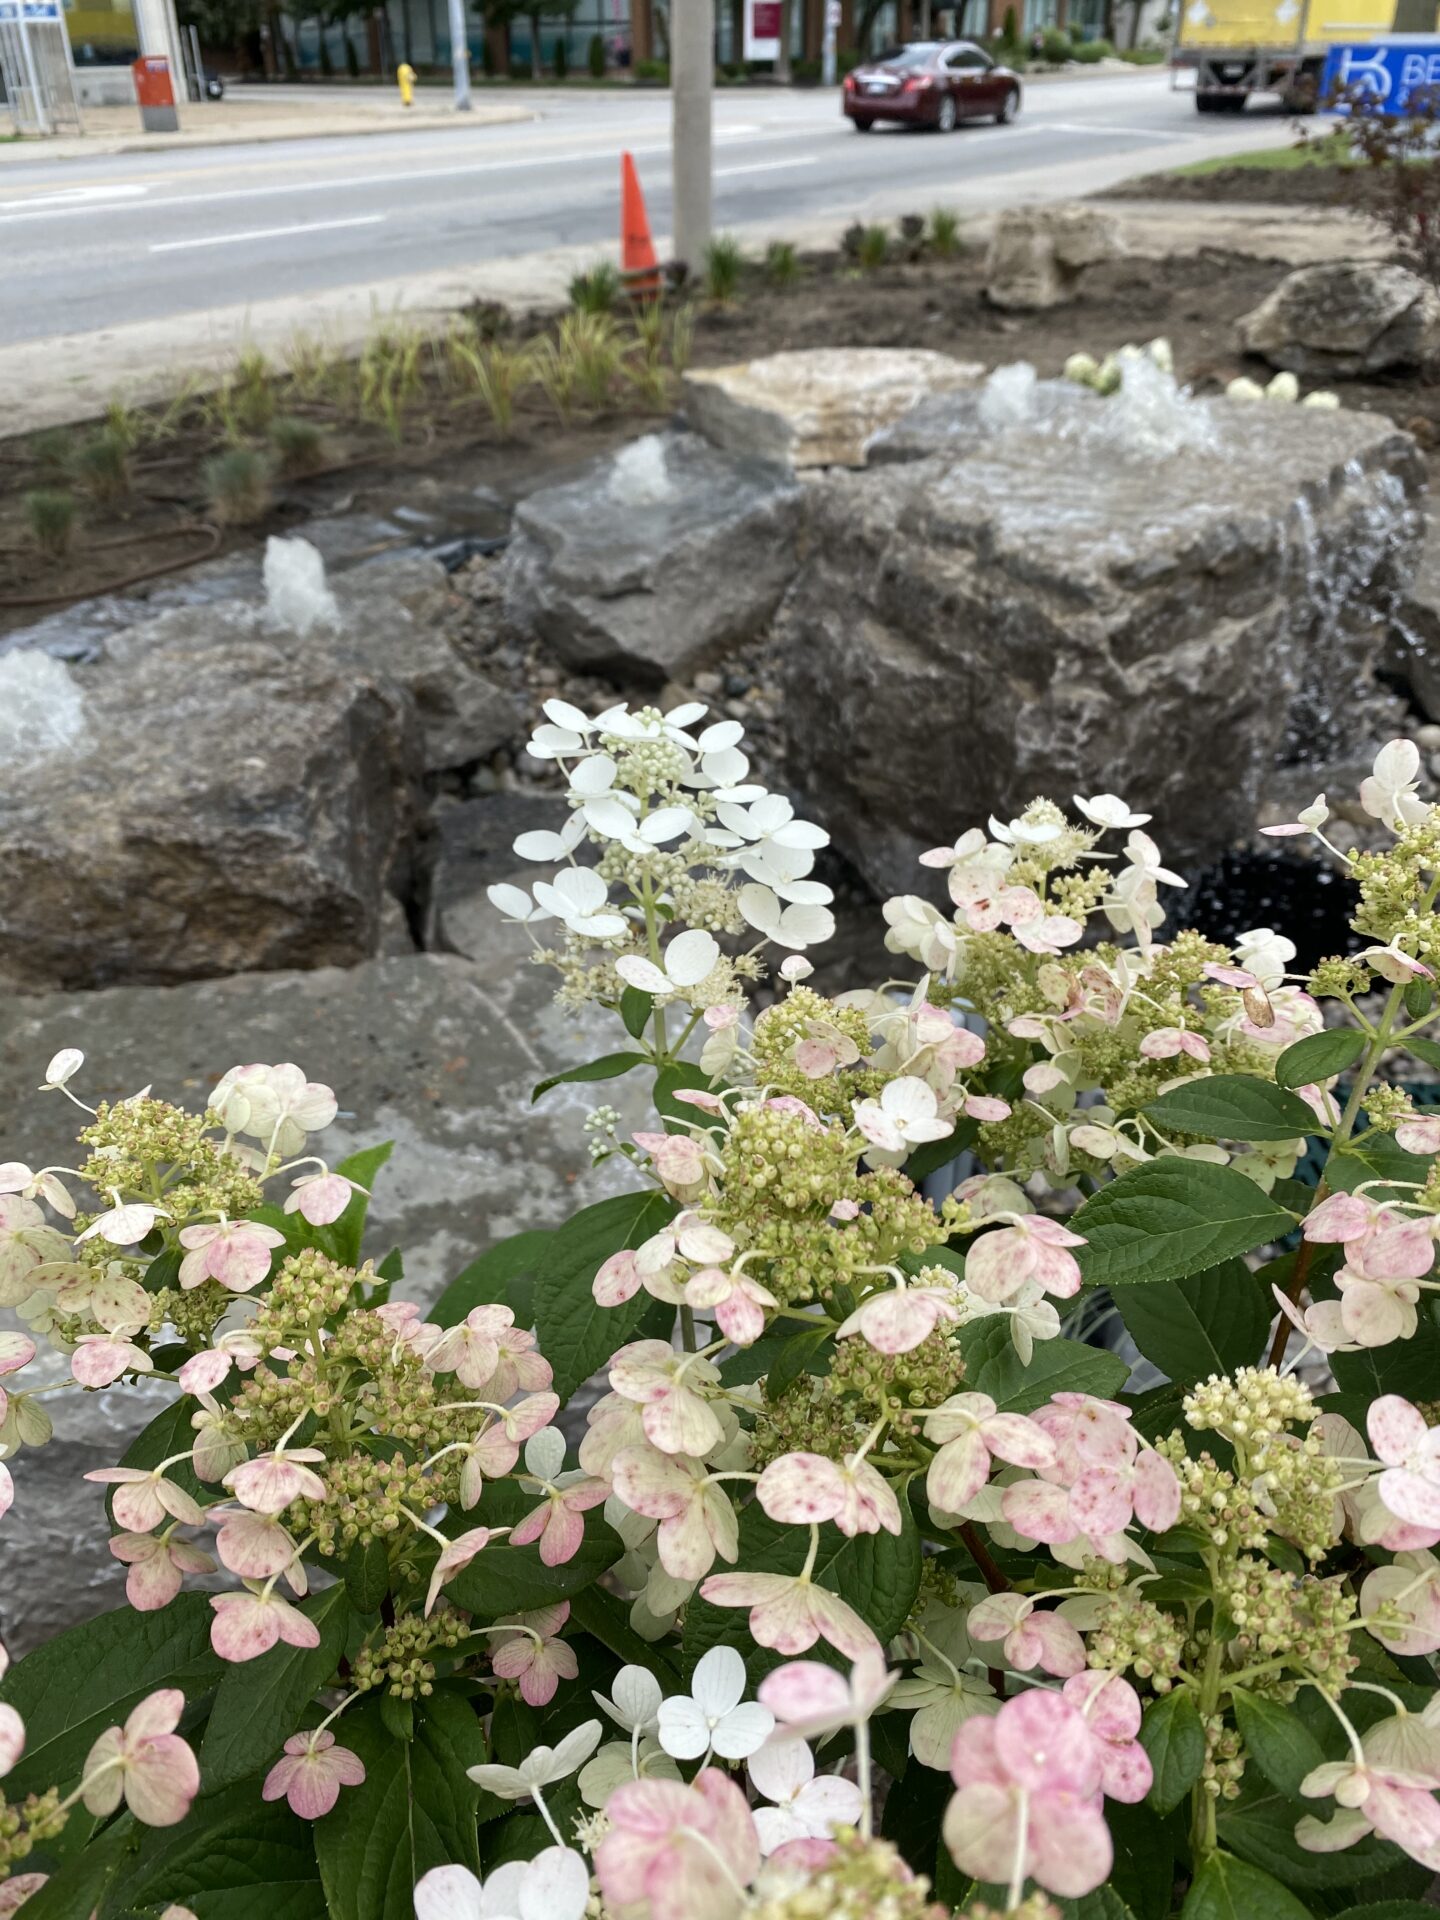 Blooming hydrangeas in the foreground with large rocks and splashing water behind. A street with moving vehicles and a sidewalk is visible in the background.